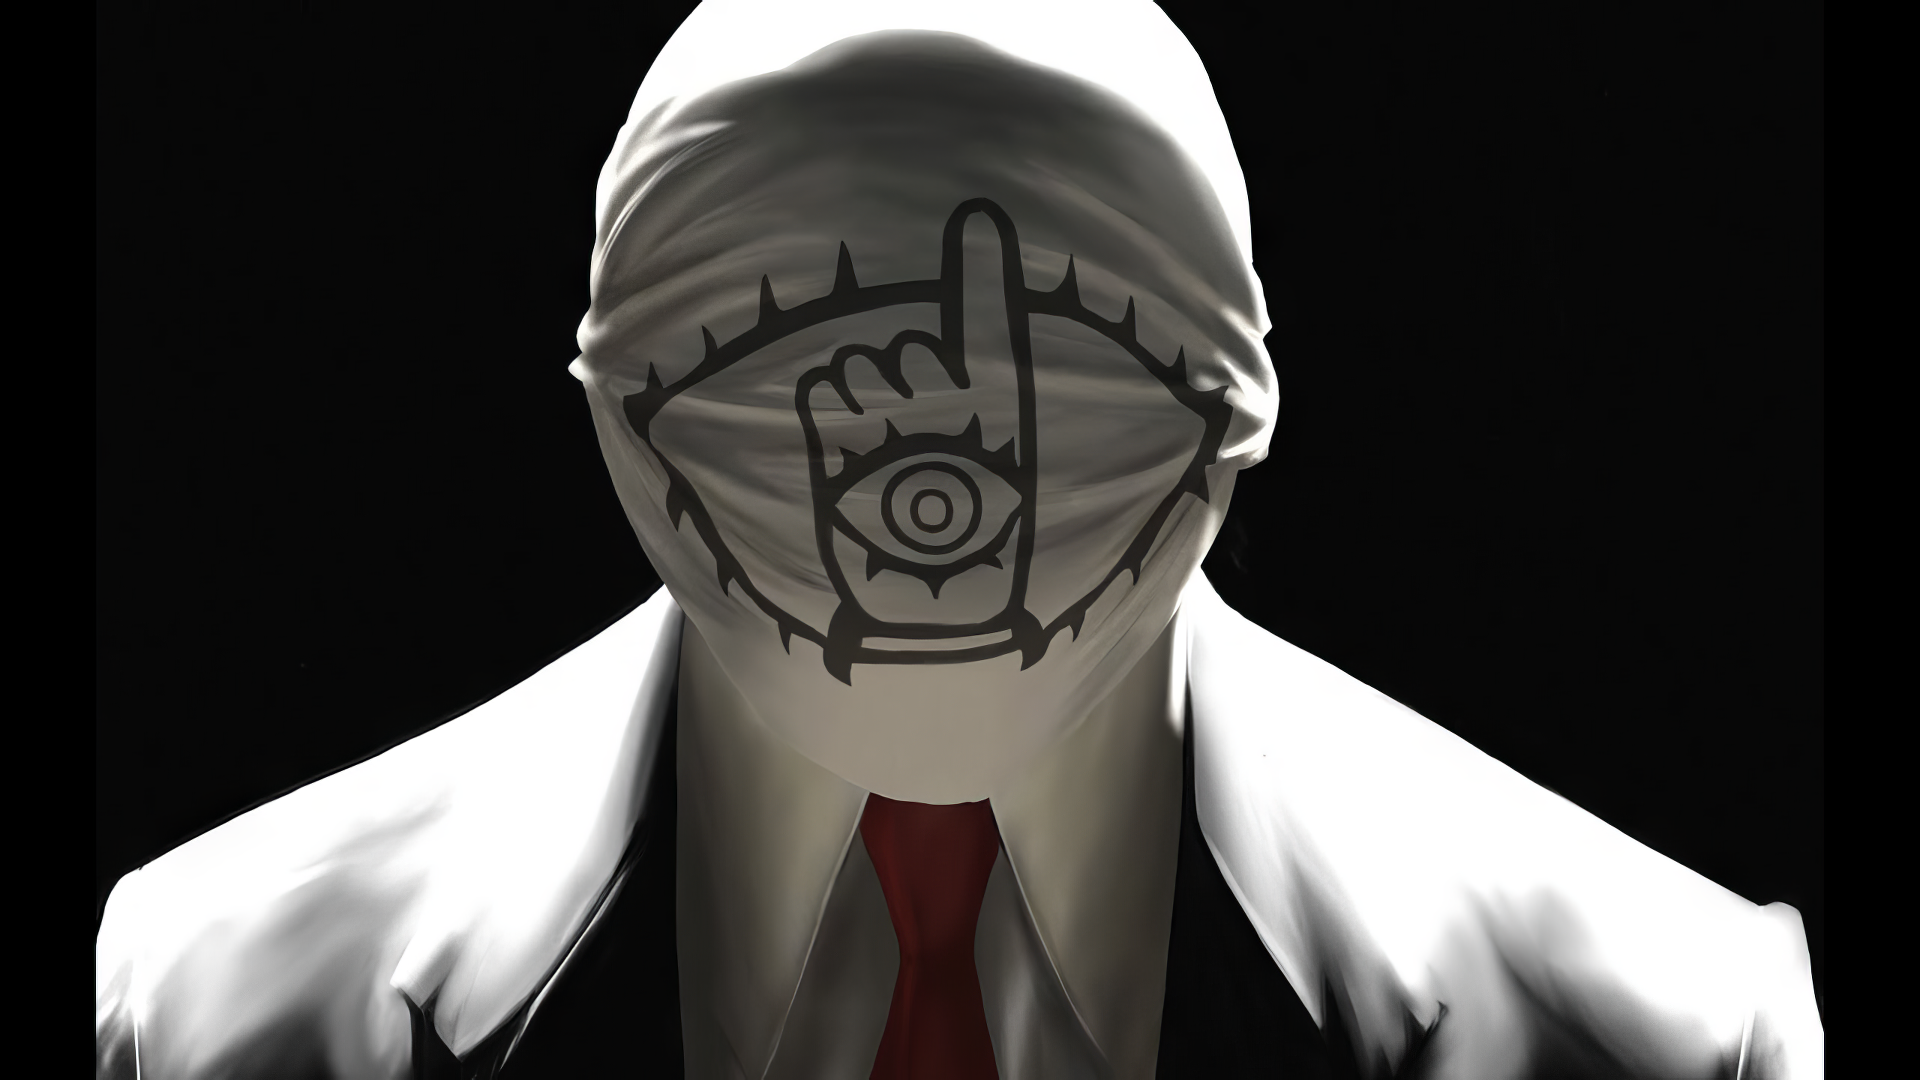 HD desktop wallpaper featuring an iconic 20th Century Boys character with symbolic hand covering face and eye emblem, set against a black background for a dramatic effect.